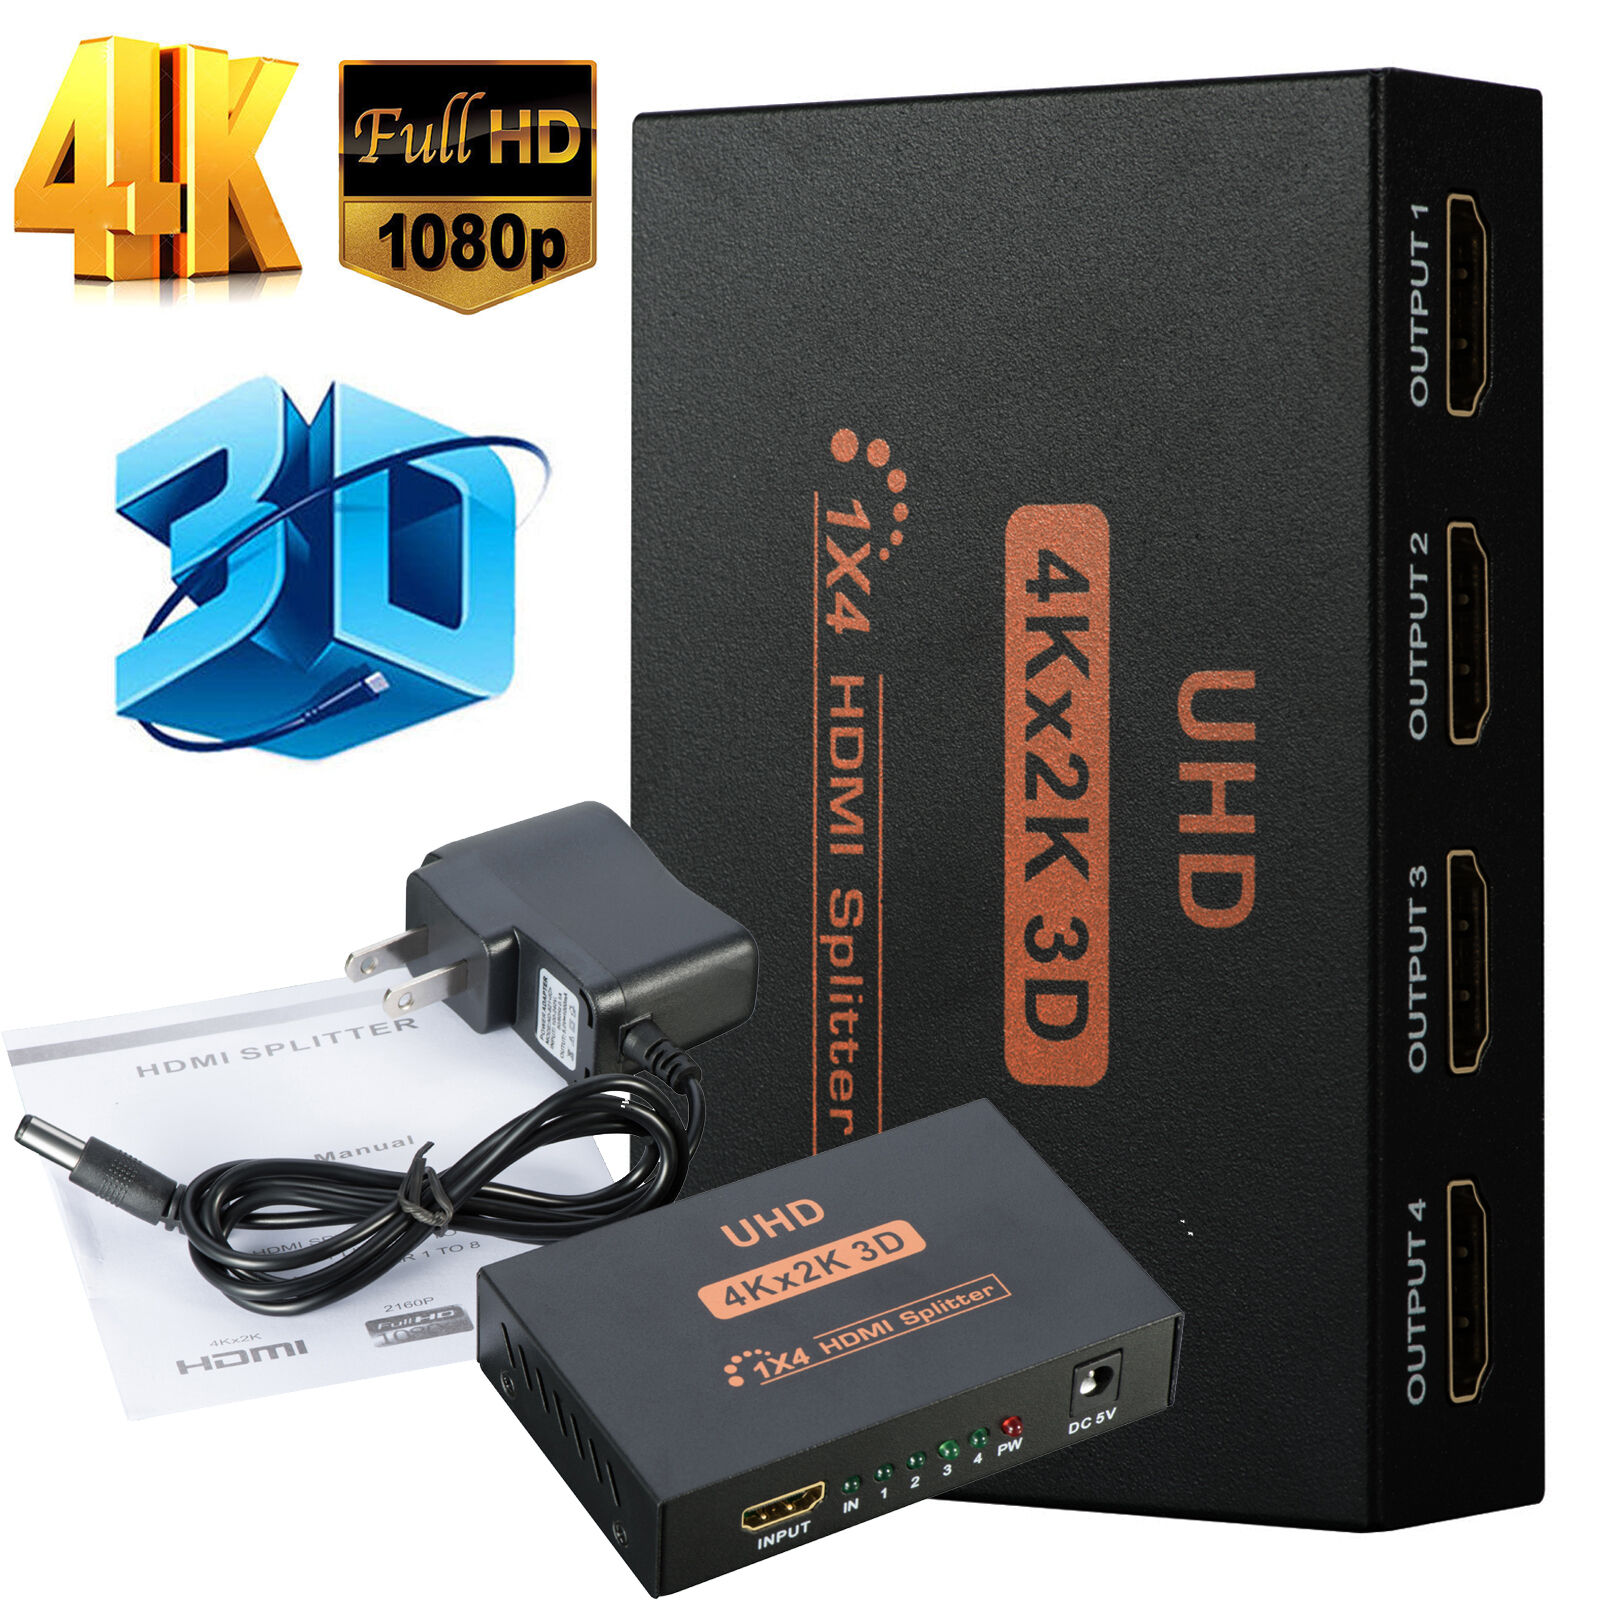 Ultra HD 4K 4 Port HDMI Splitter 1x4 Repeater Amplifier 1080P 3D Hub 1 In 4 Out Unbranded NOT SPECIFIED